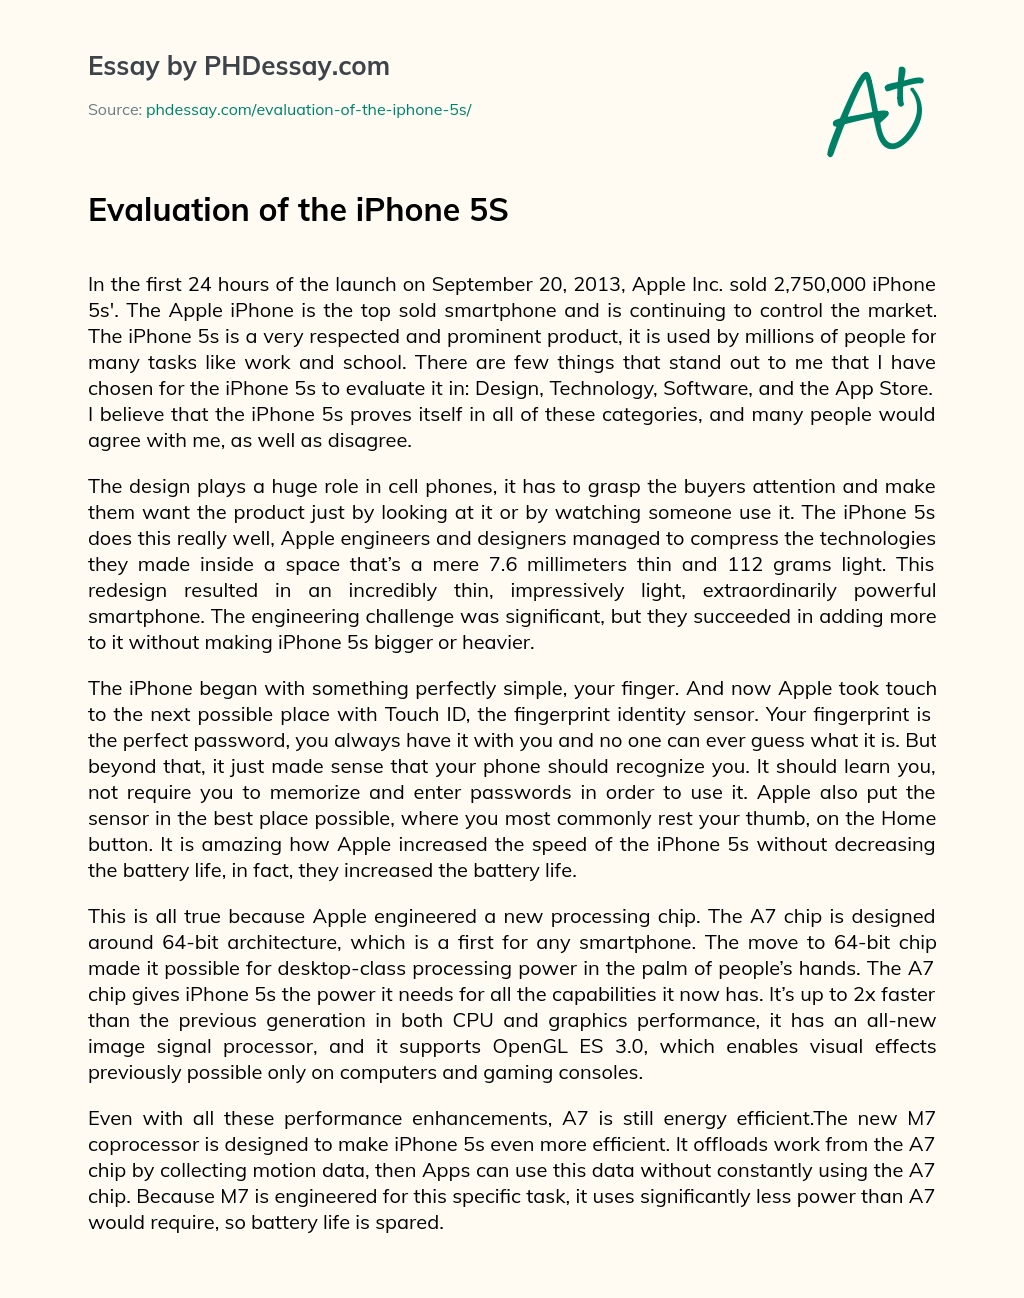 Evaluation of the iPhone 5S essay